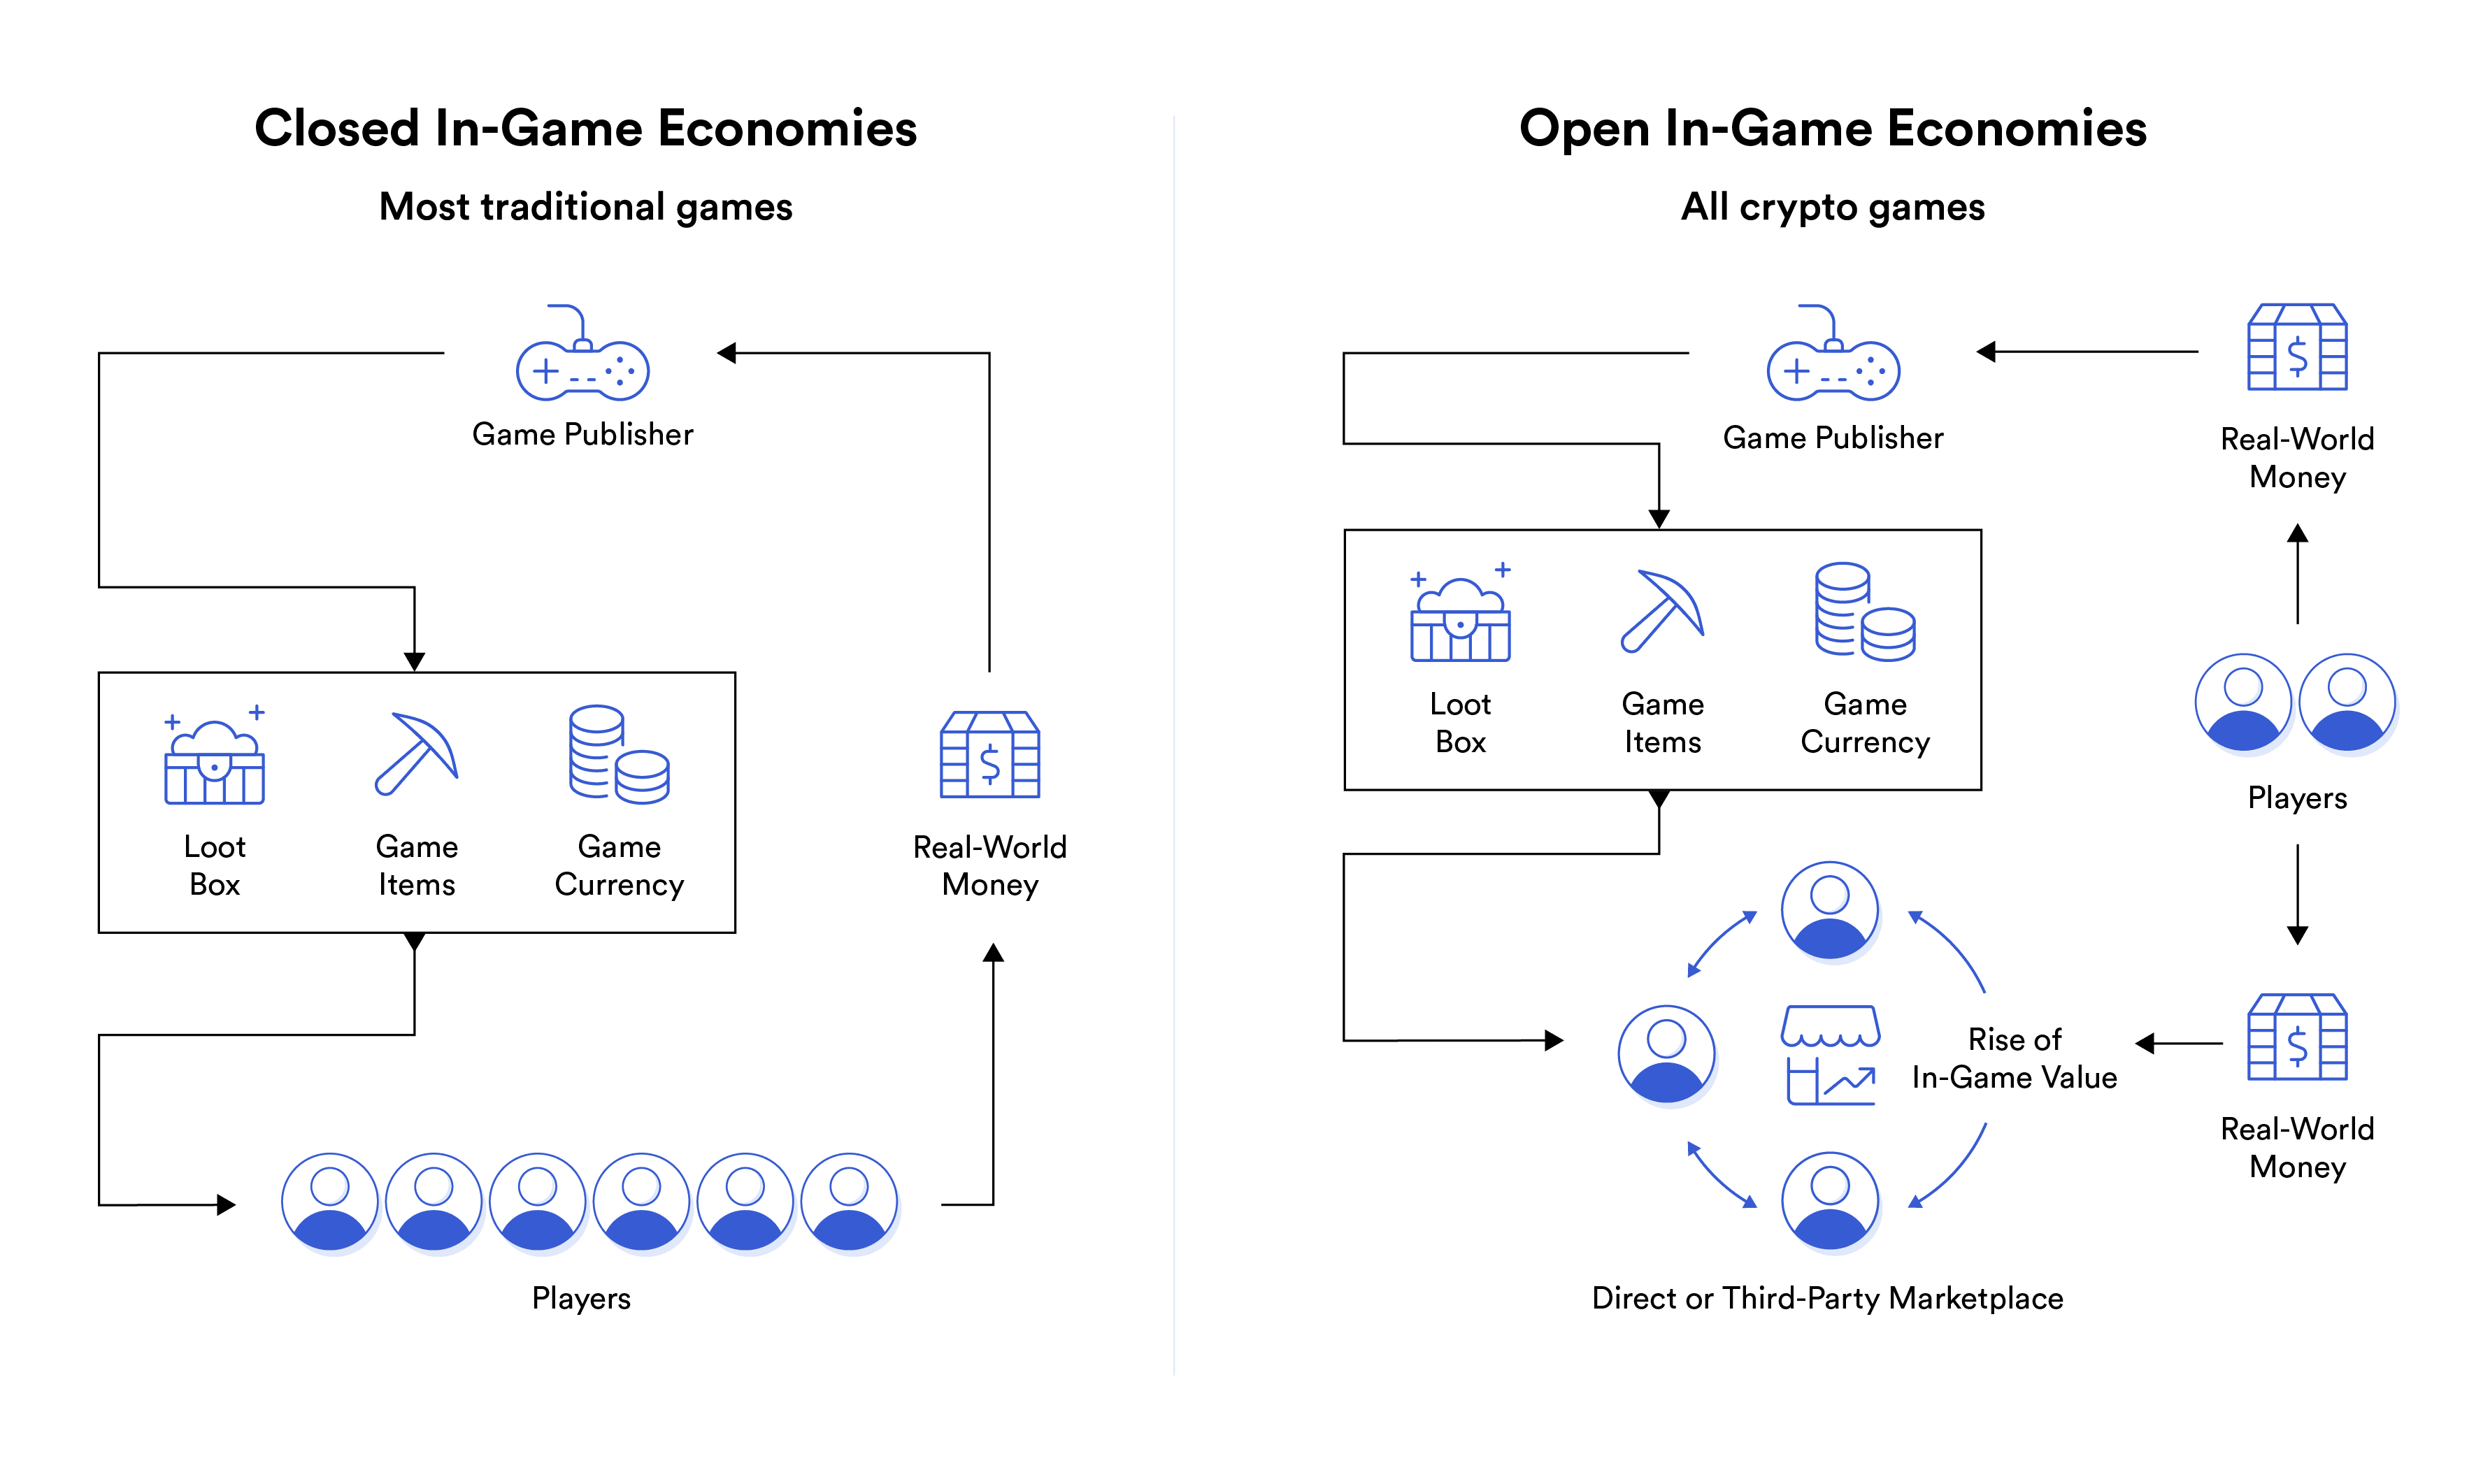 What are NFT Games - Econimies (open vs closed)